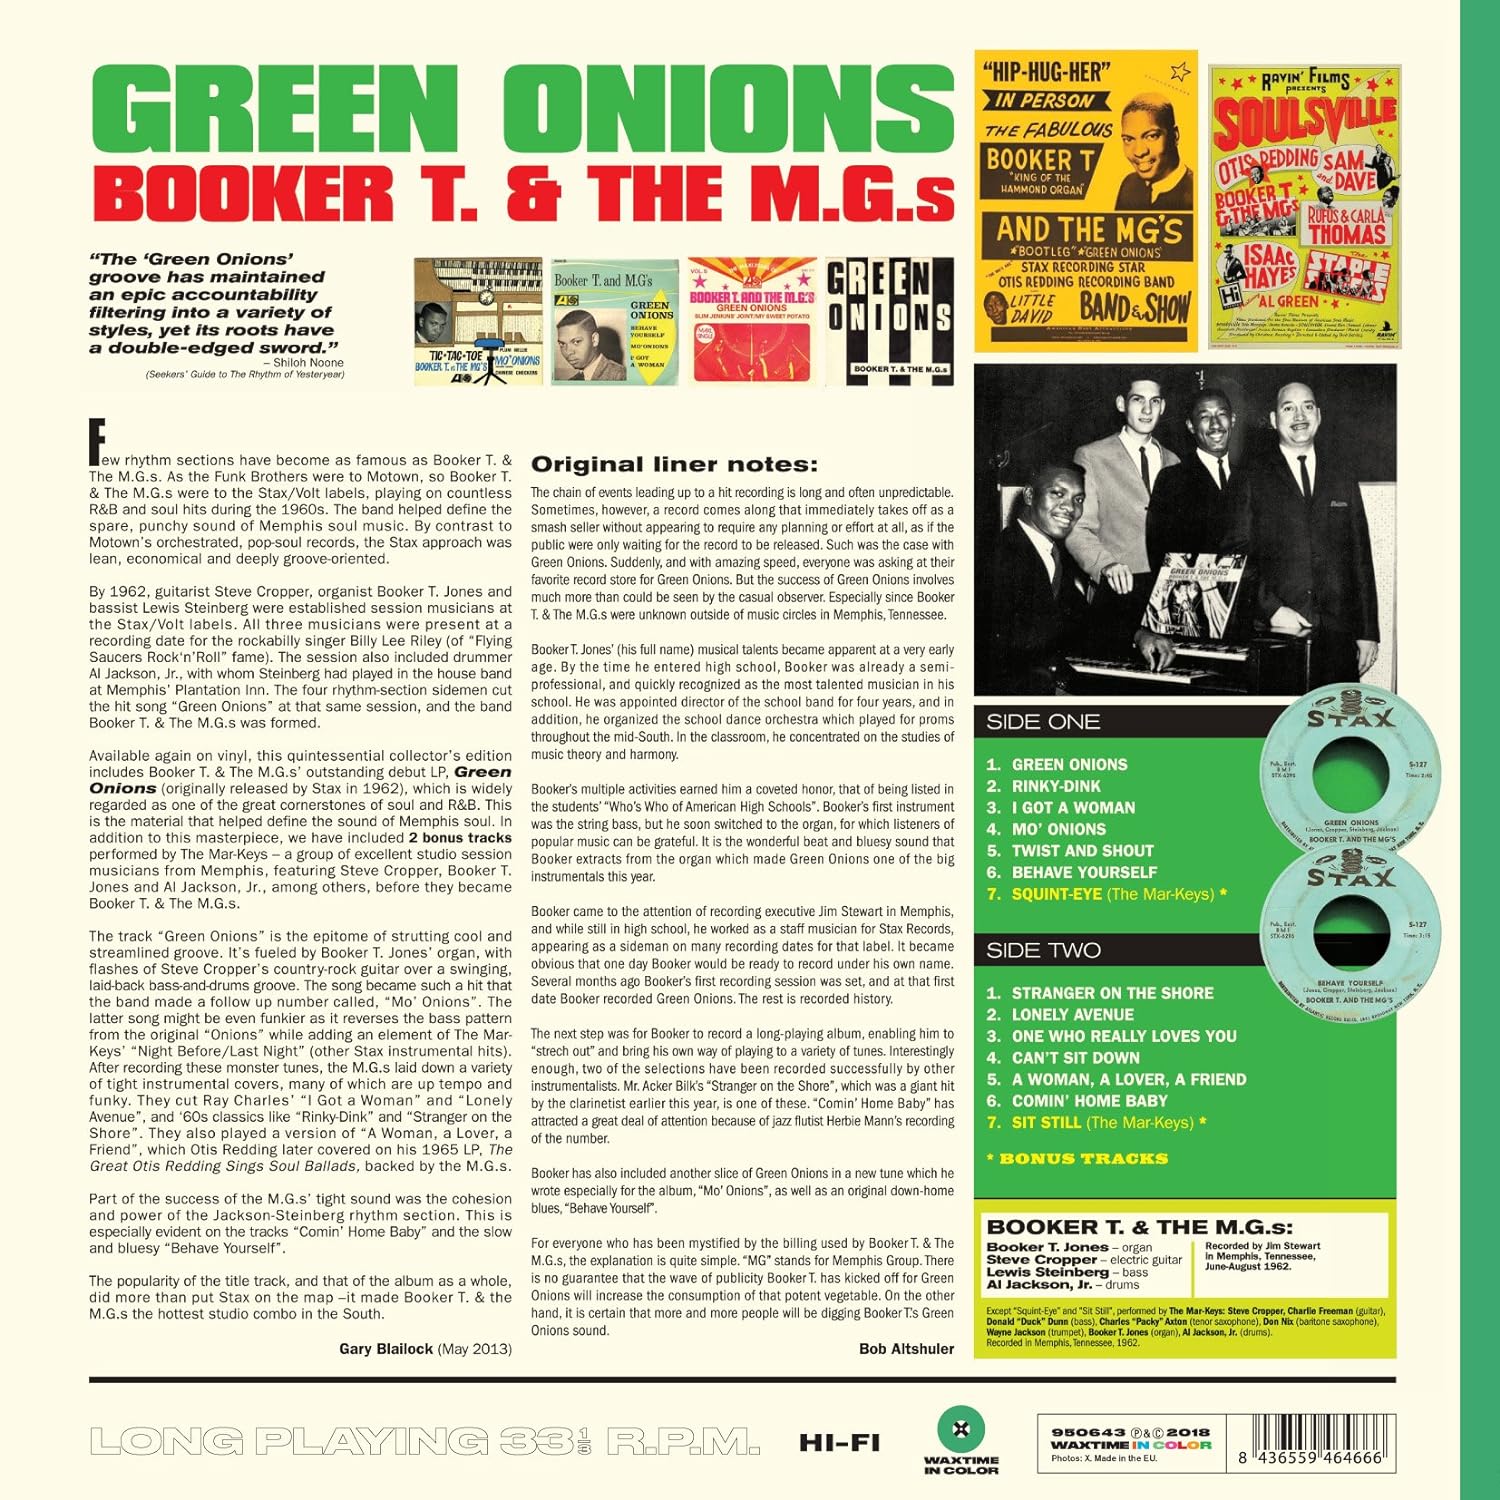 Booker T & the Mg's - Green Onions (Limited Edition Import, Green Vinyl) (LP) - Joco Records